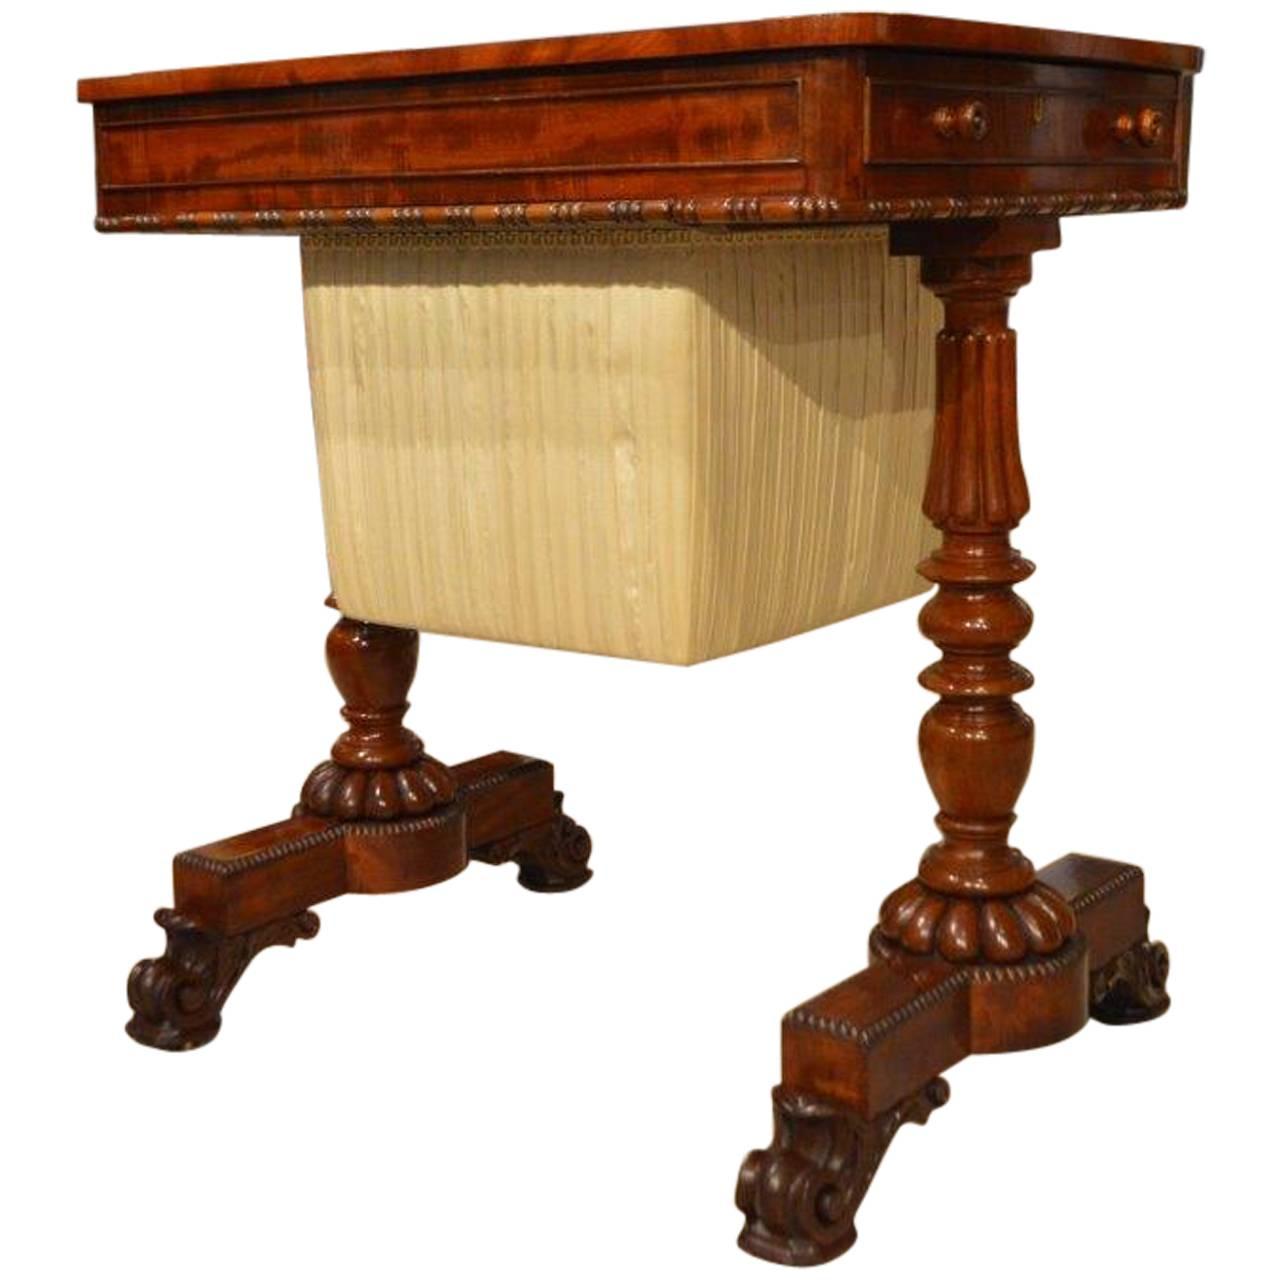 Superb Flame Mahogany Regency/William IV Period Antique Work Table For Sale